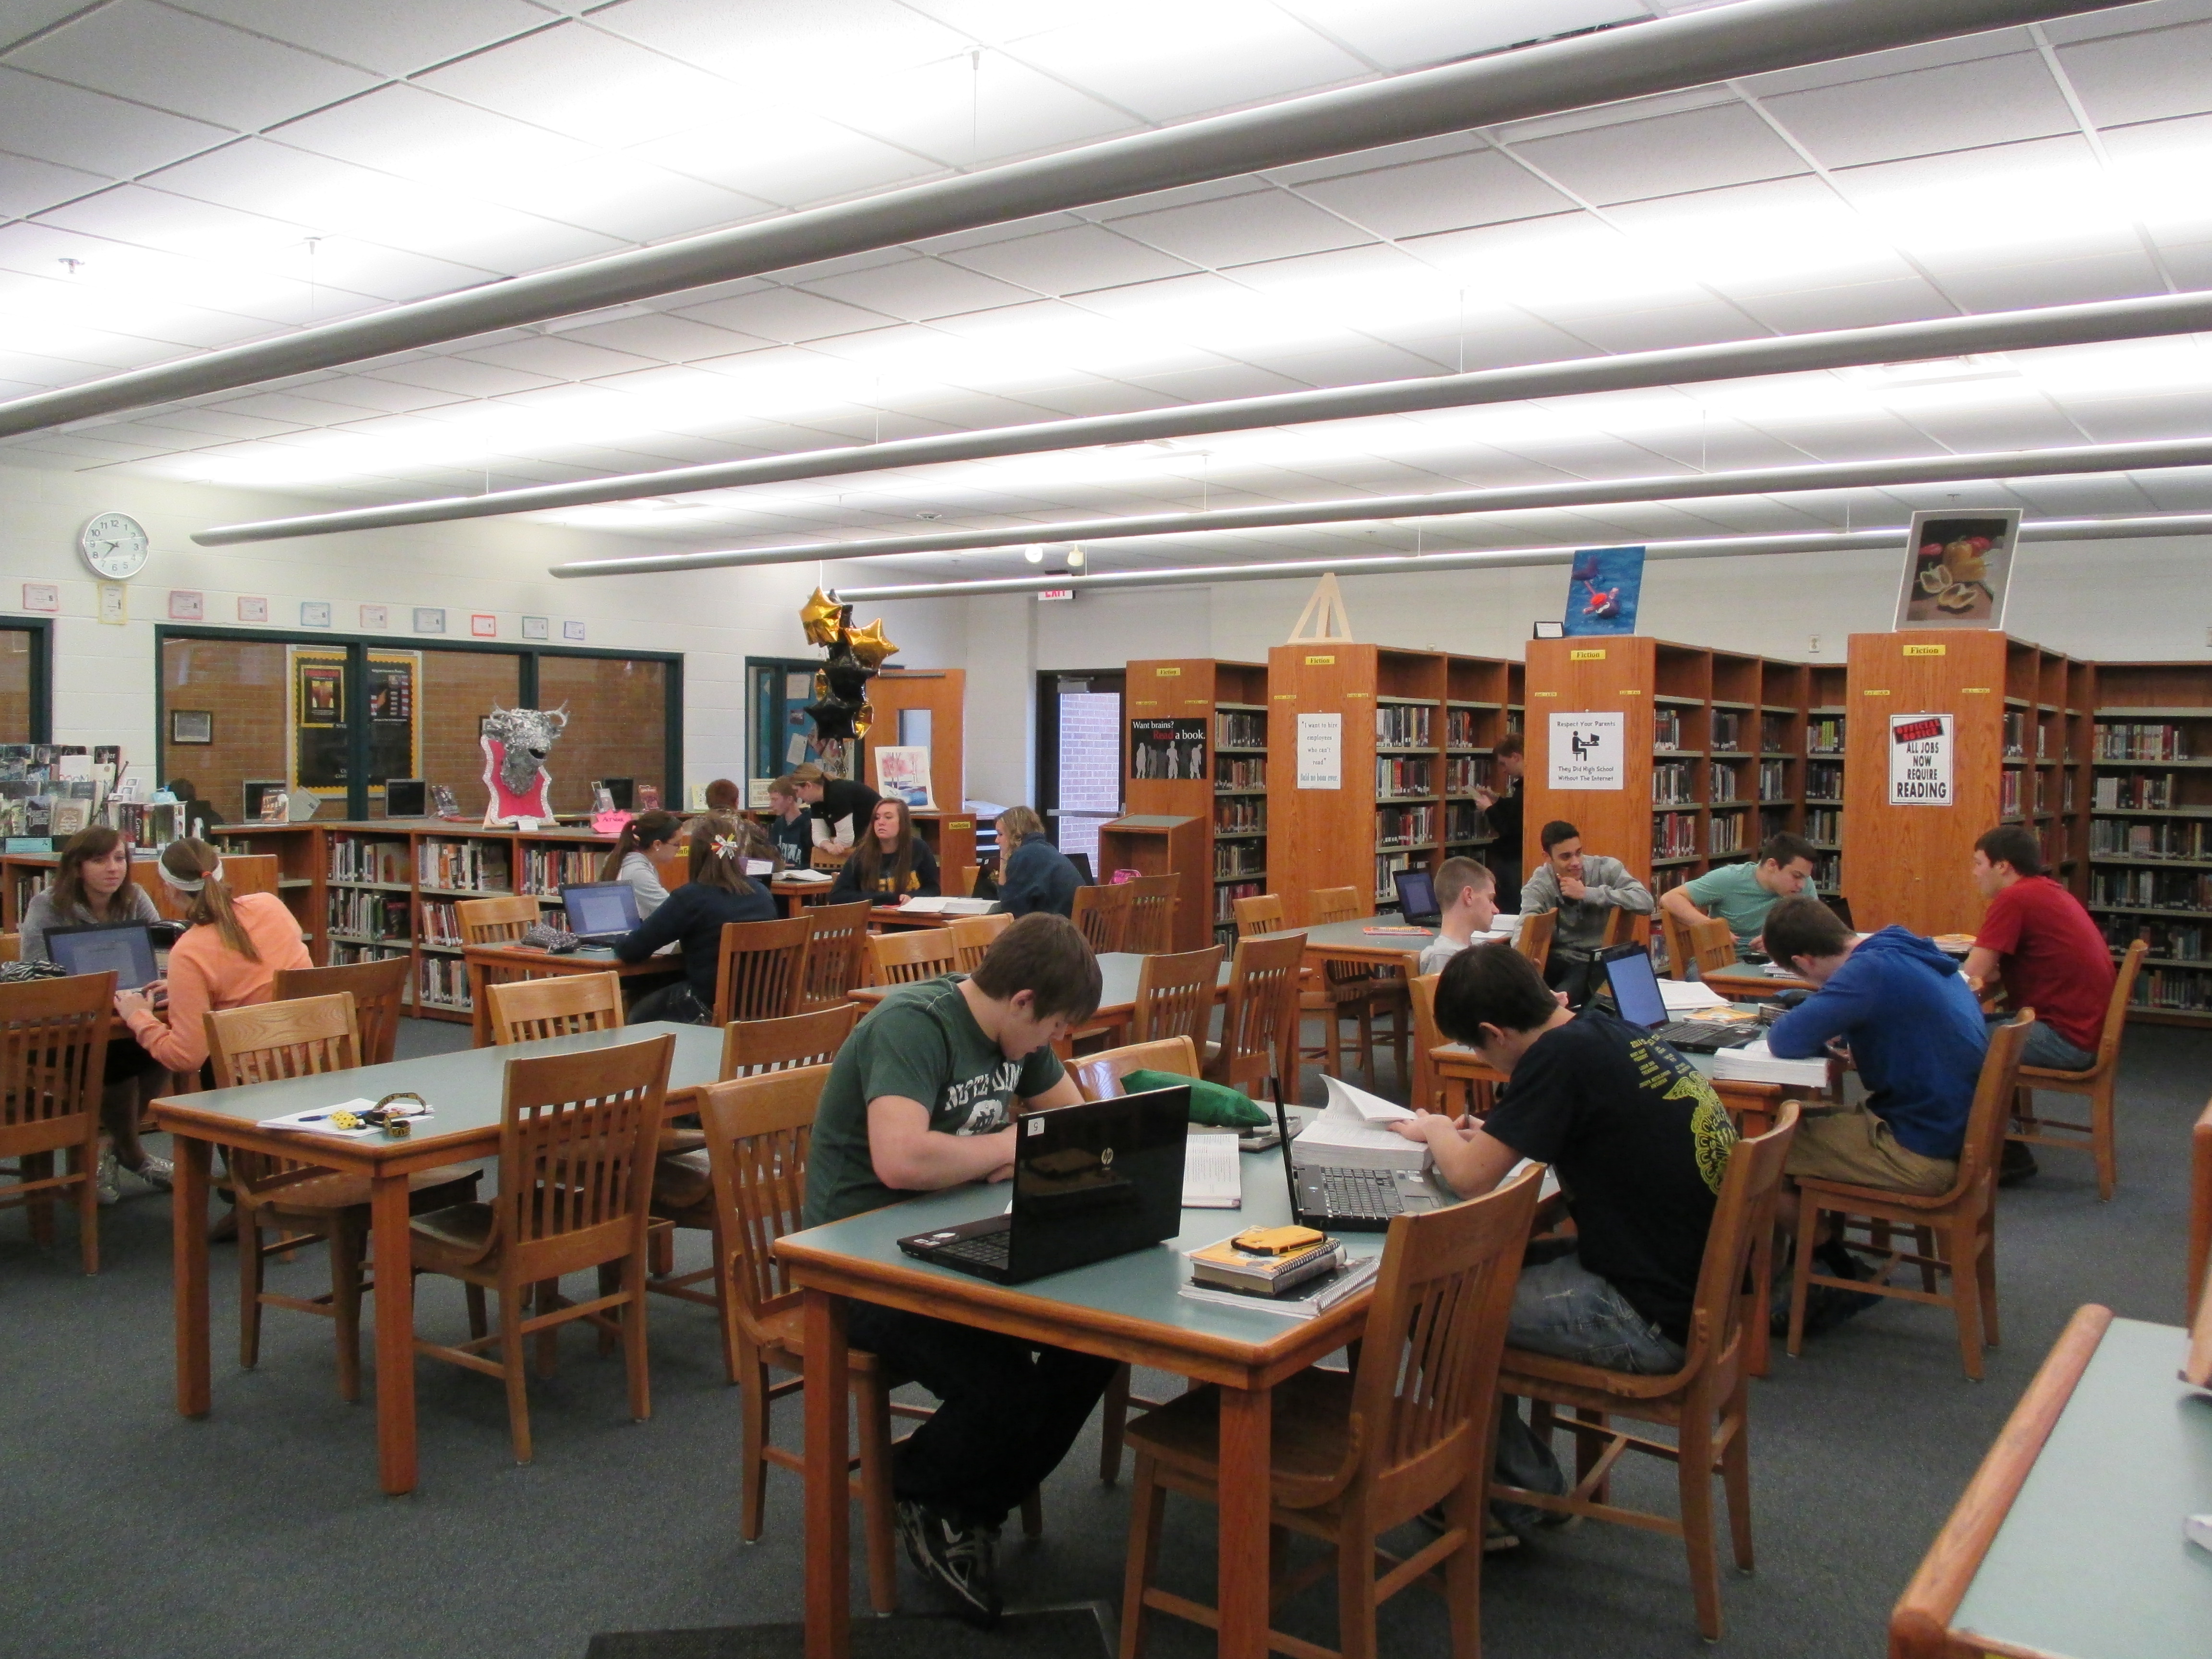 Classes Working in the Library